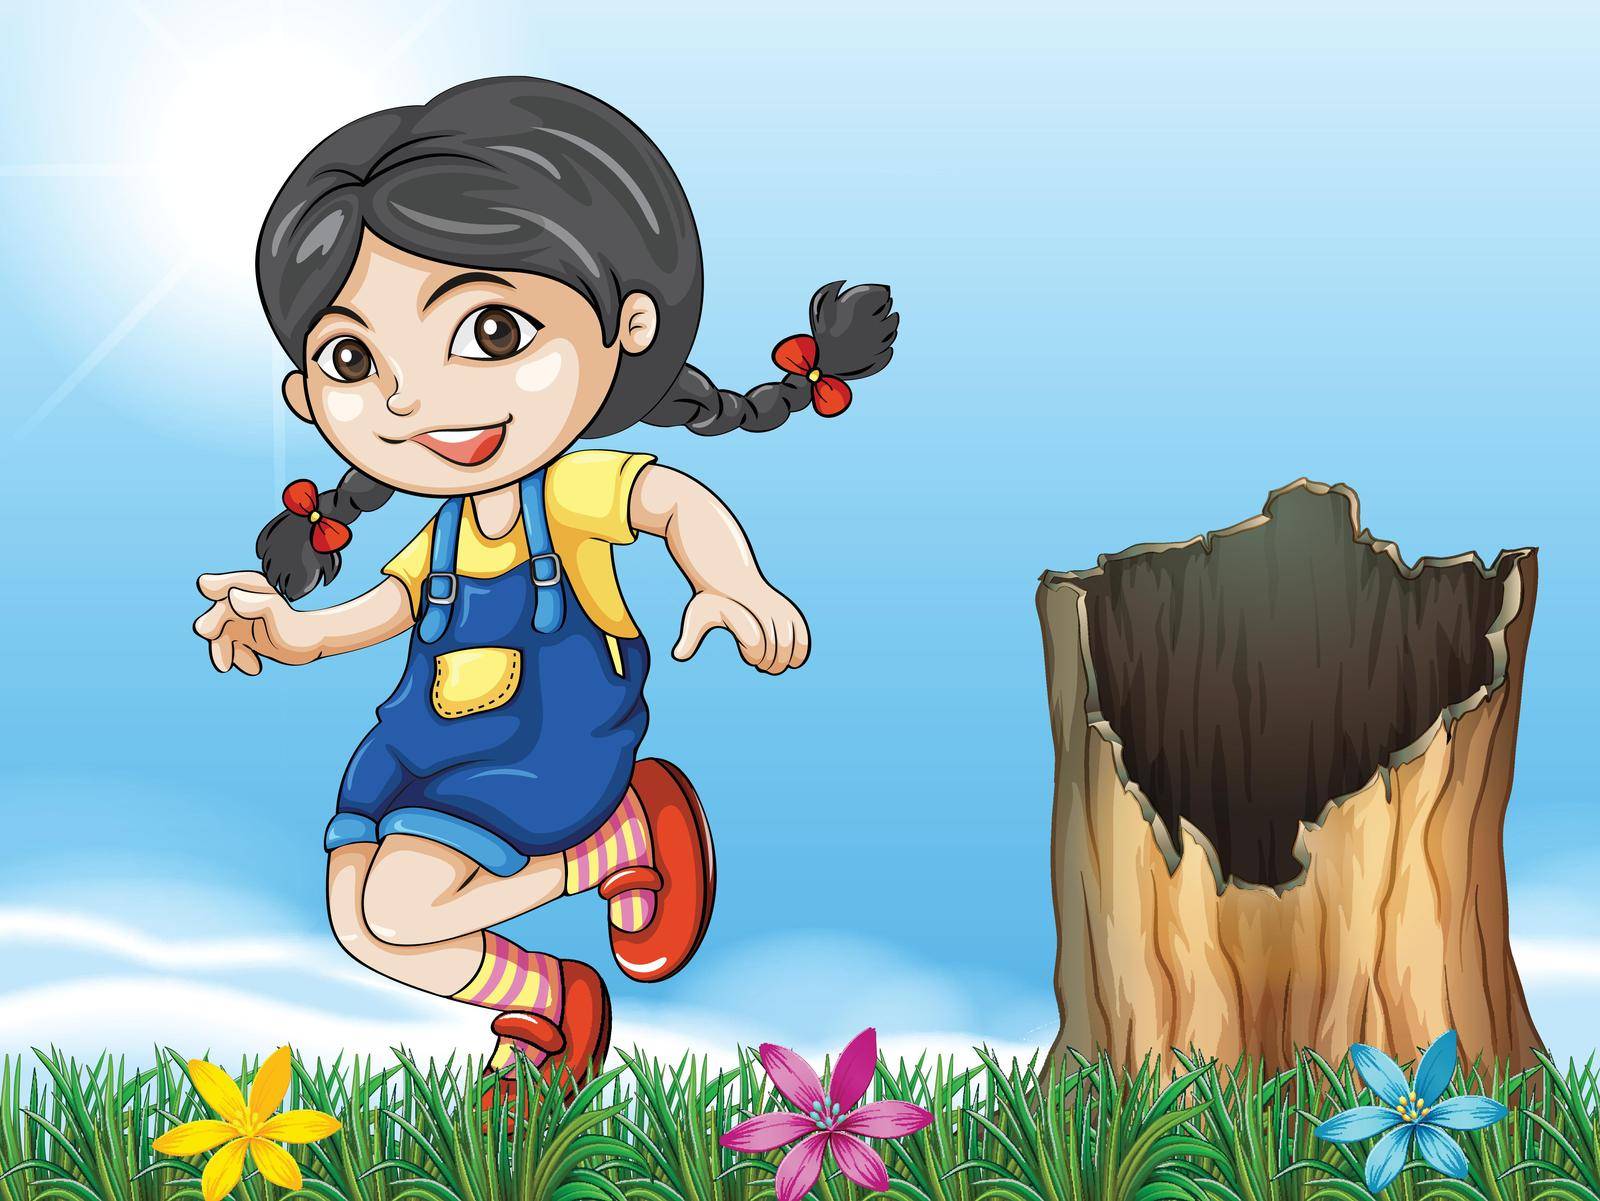 A girl playing beside the stump by iimages